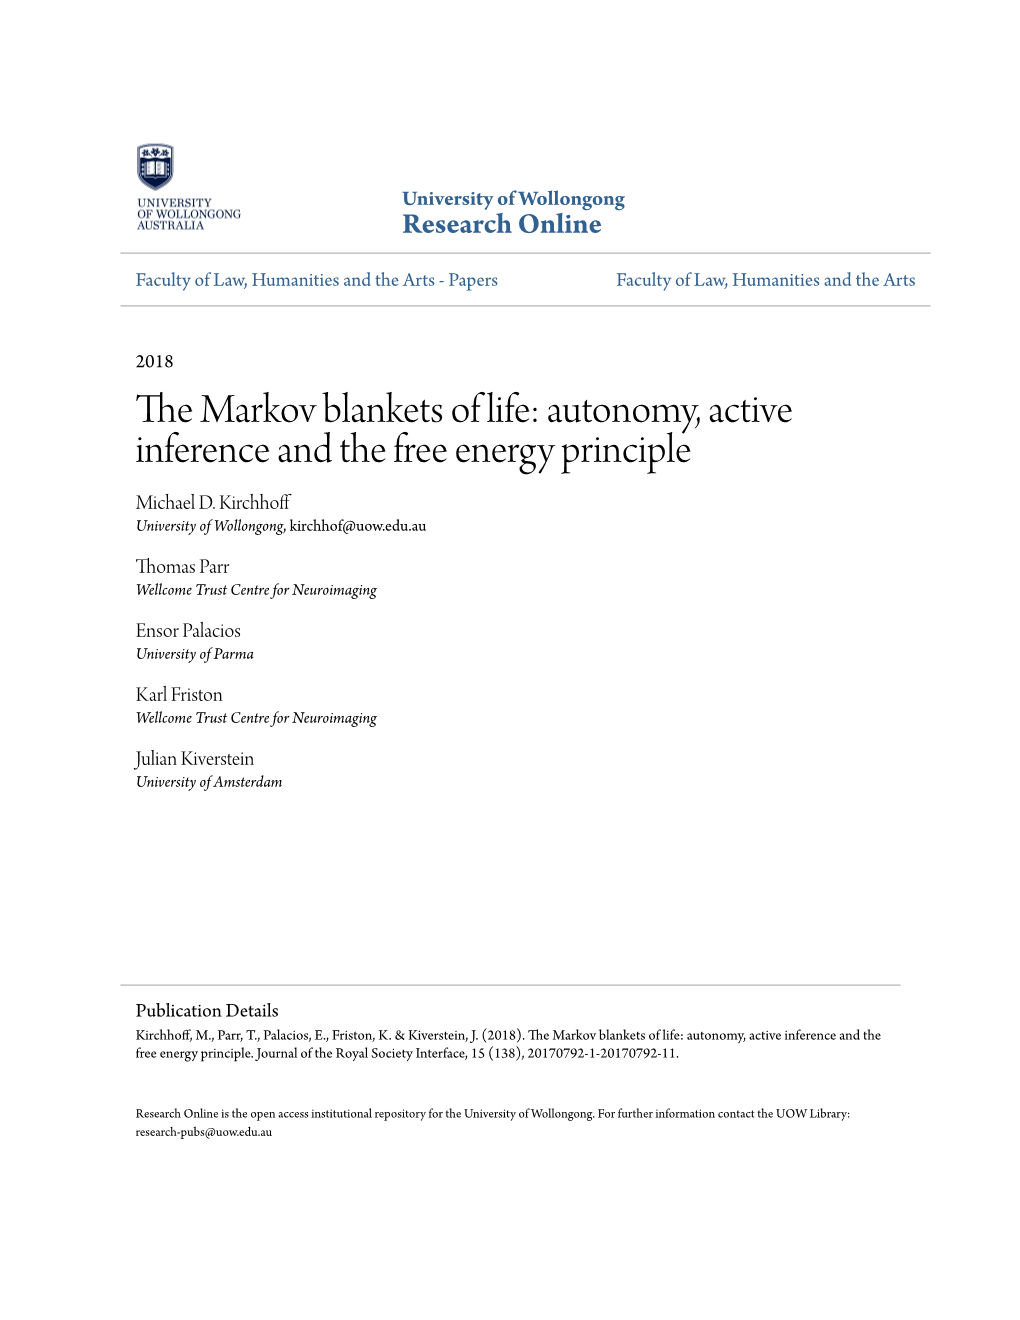 Autonomy, Active Inference and the Free Energy Principle Michael D